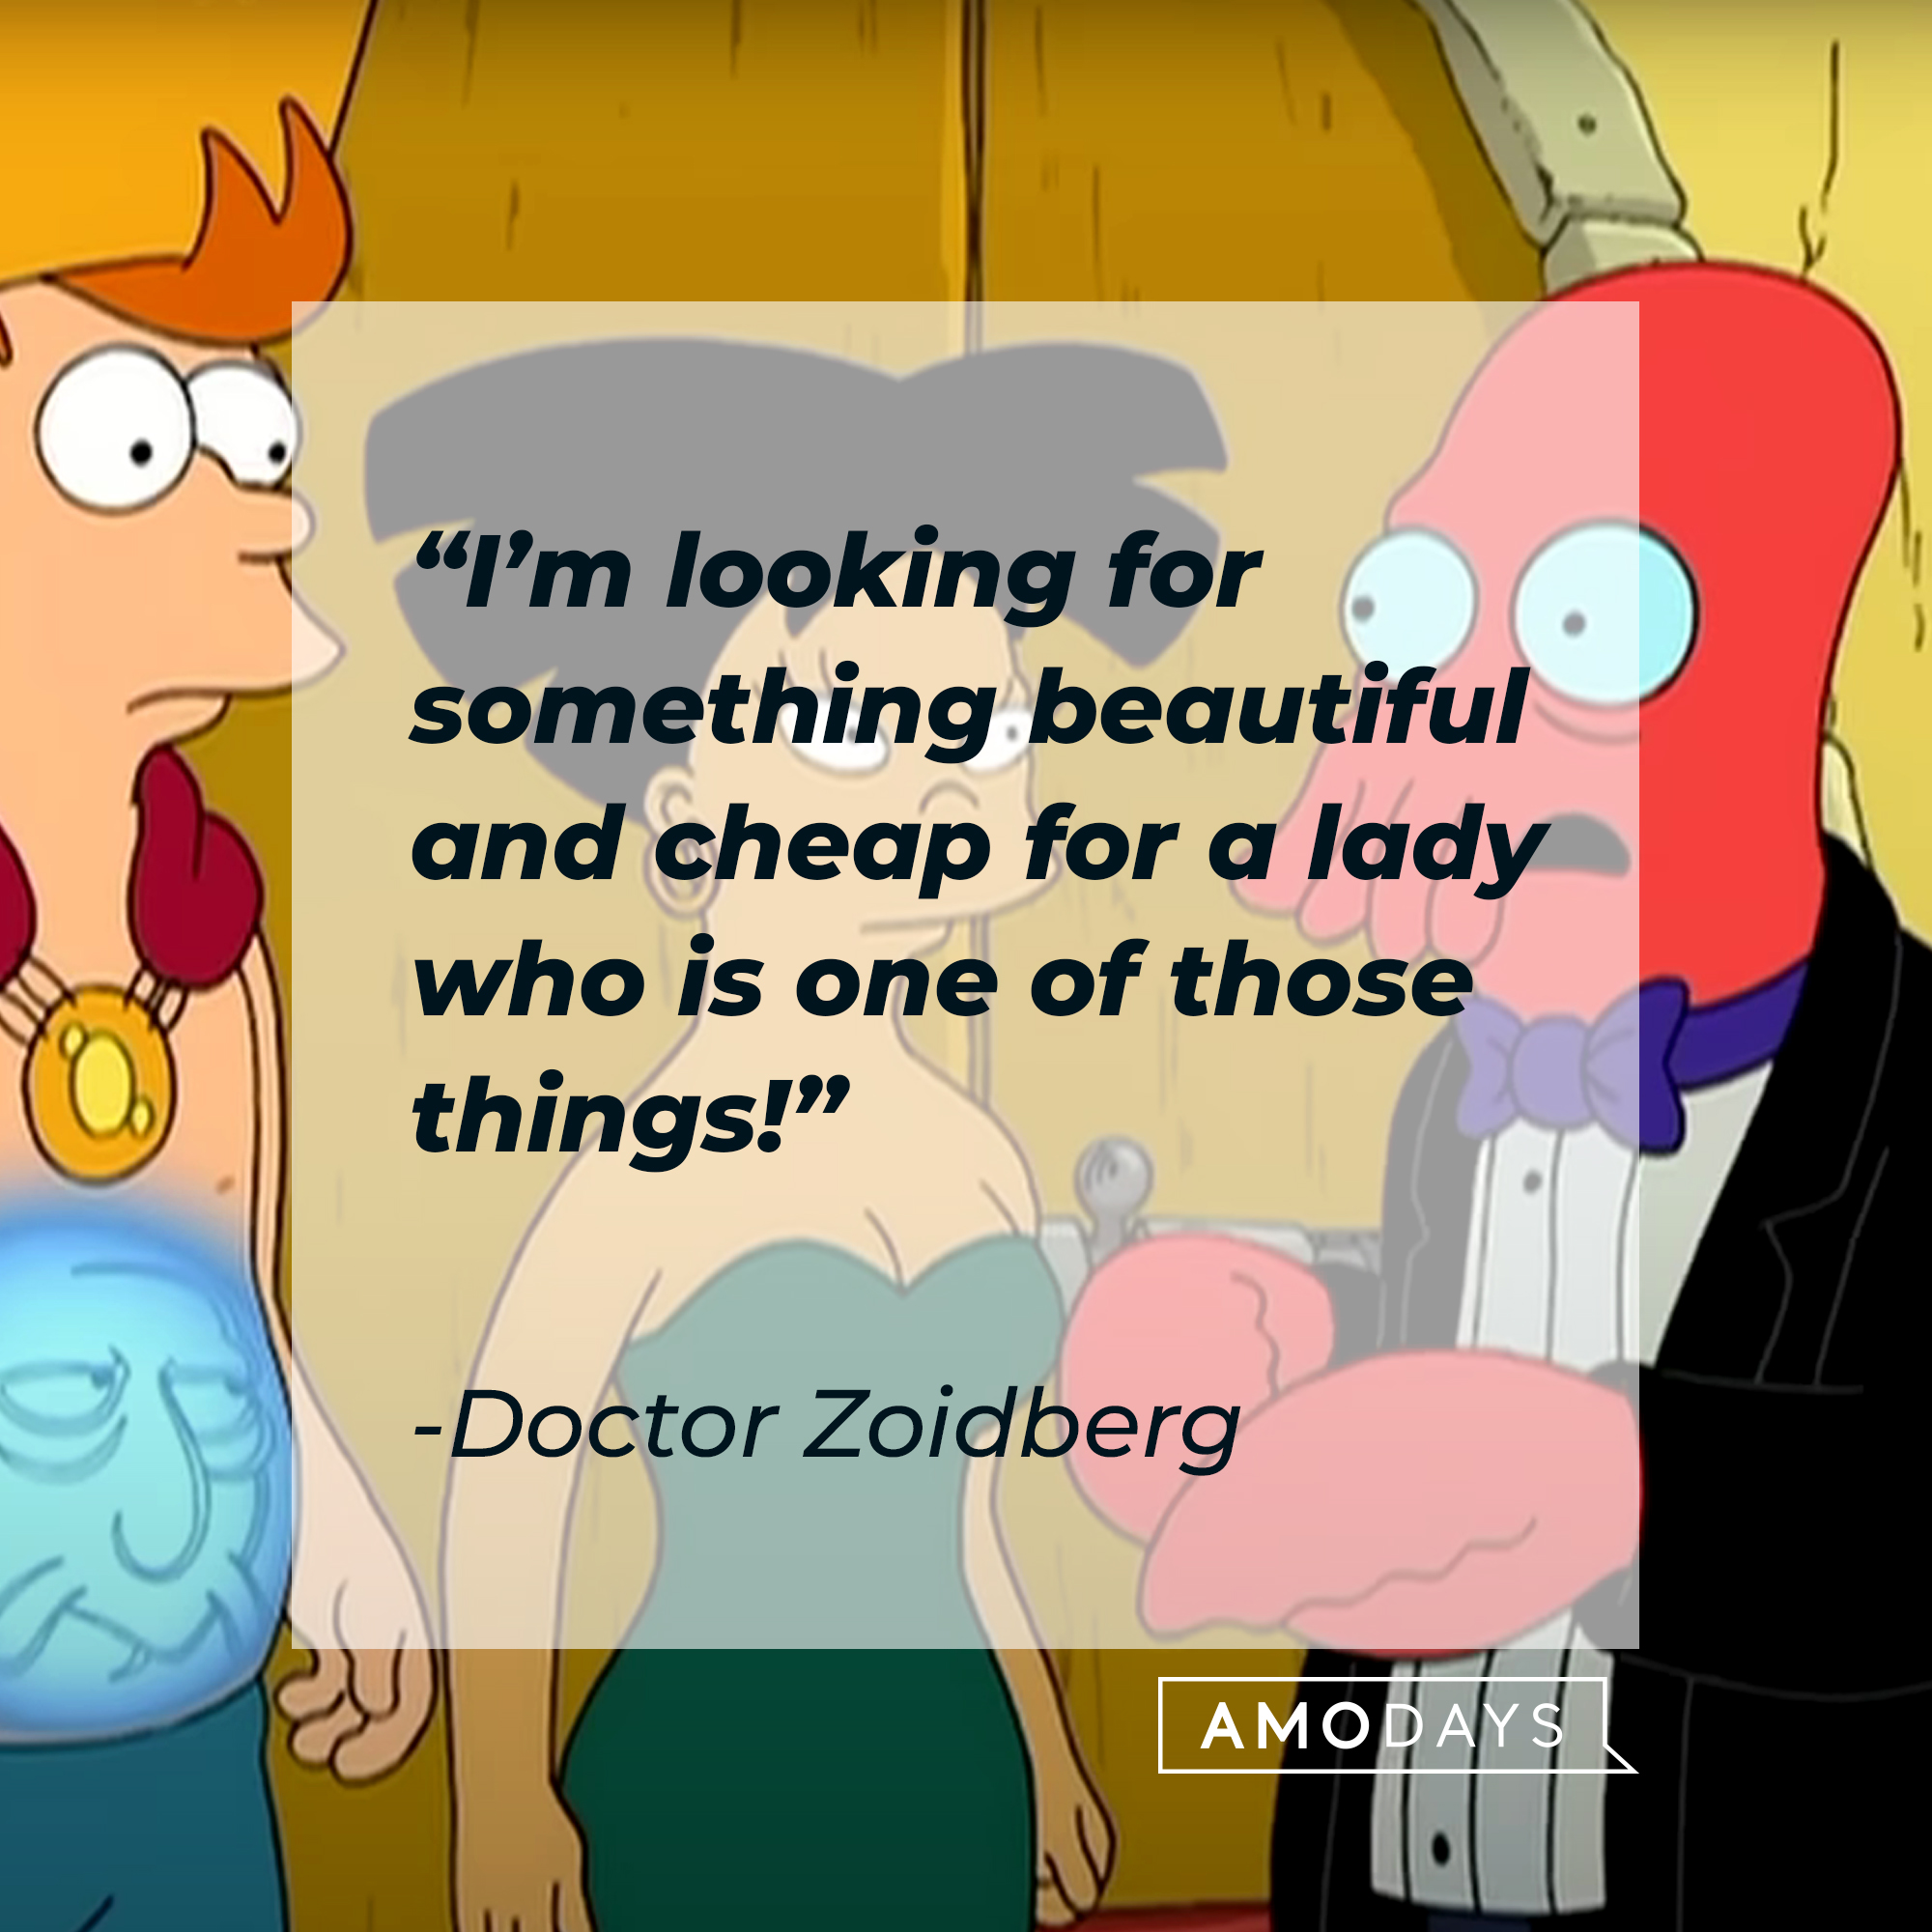 Doctor Zoidberg, with two other characters and his quote: "“I’m looking for something beautiful and cheap for a lady who is one of those things!” | Source:  facebook.com/Futurama